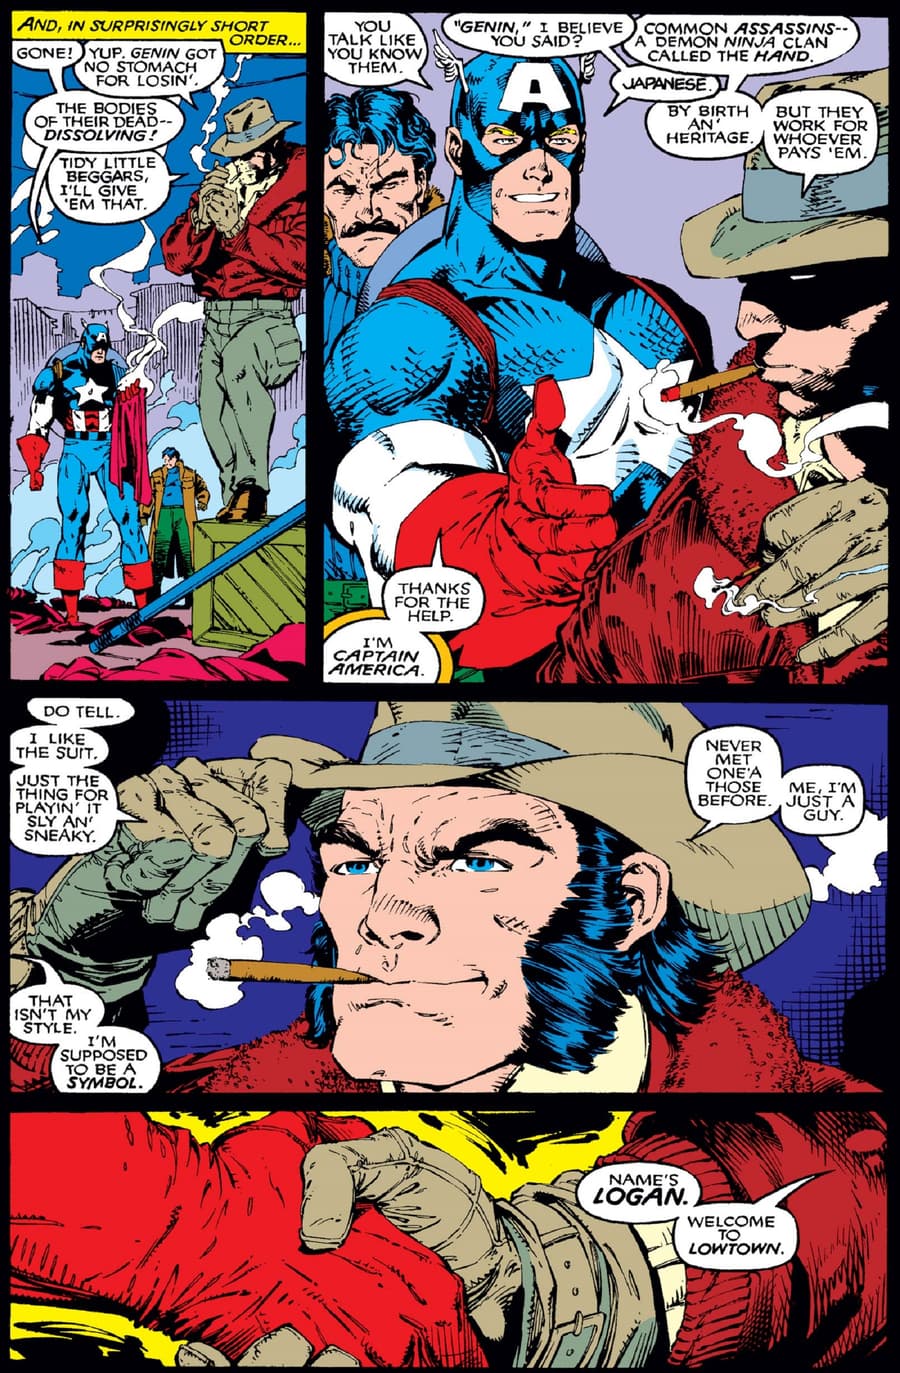 Logan meets Cap for the first time in classic issue UNCANNY X-MEN (1963) #268.